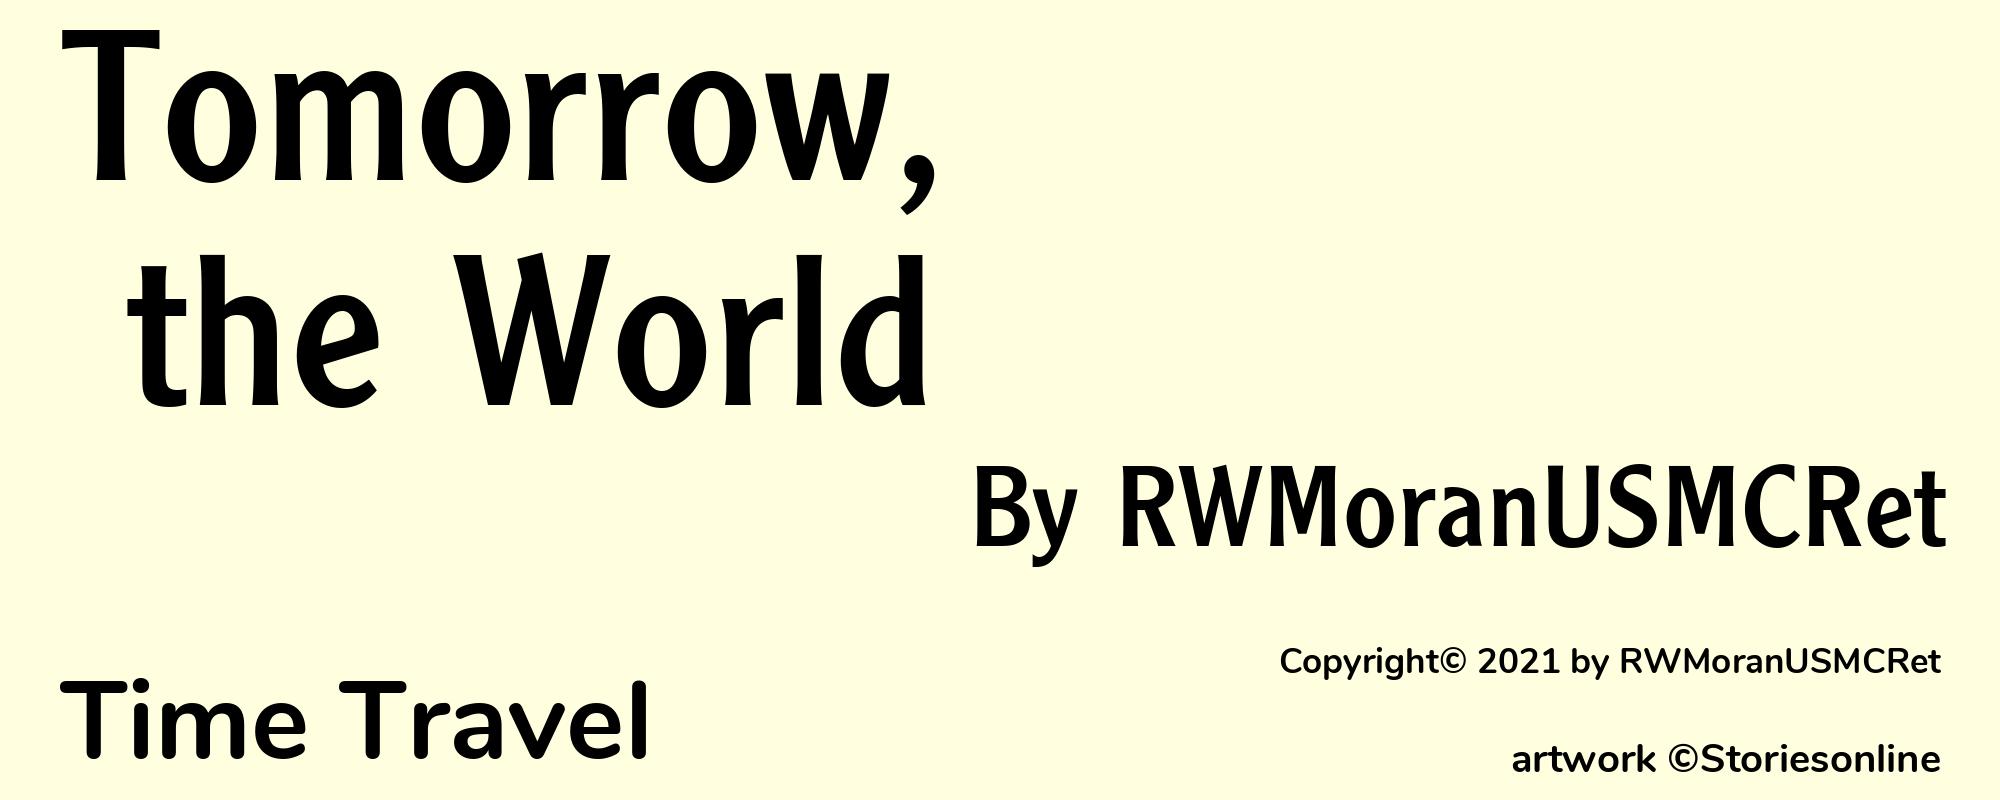 Tomorrow, the World - Cover